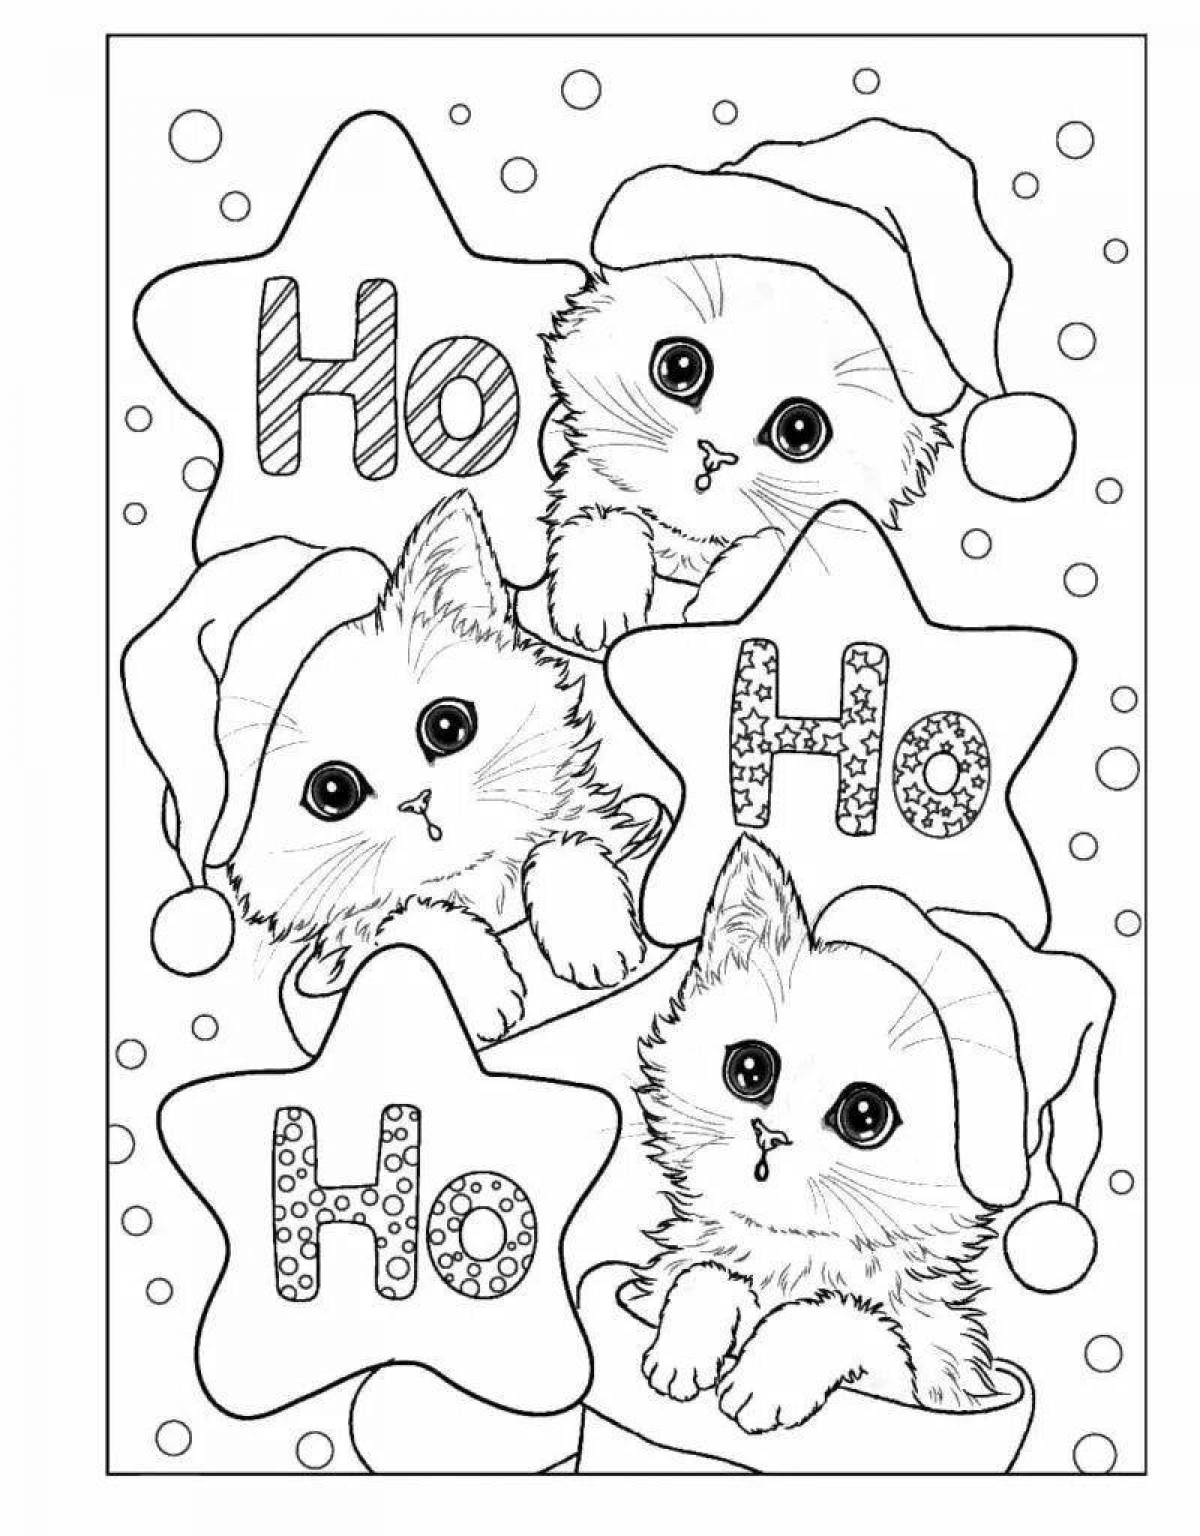 Coloring page energetic new year 2023